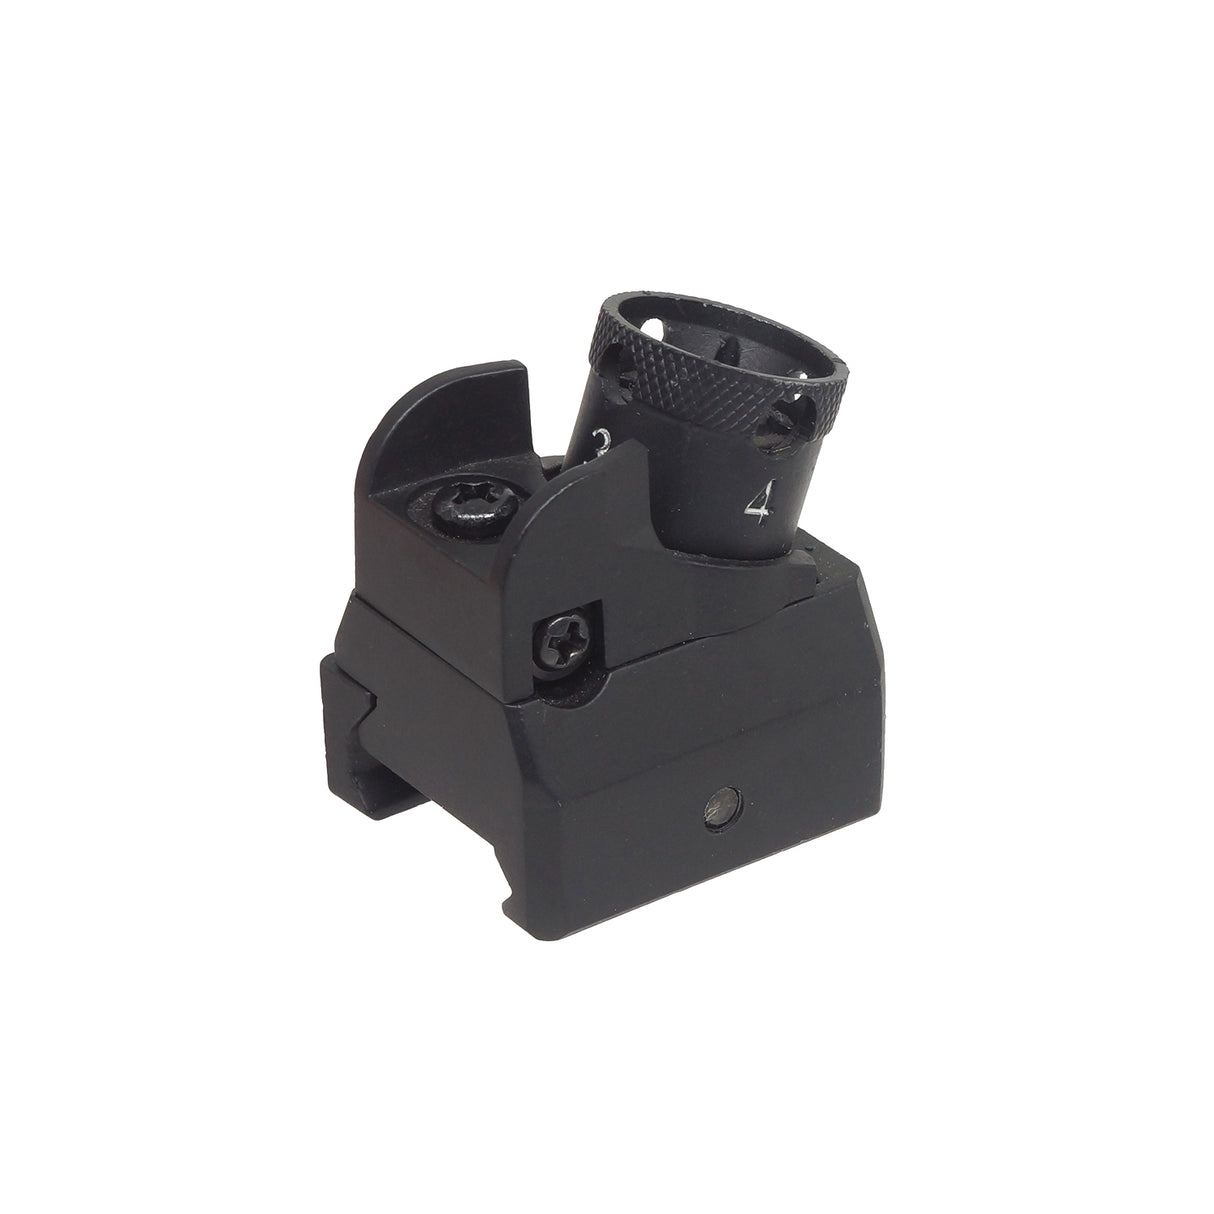 Golden Eagle 416 Style Rear Sight for 20mm Rail ( GE-M-27 )